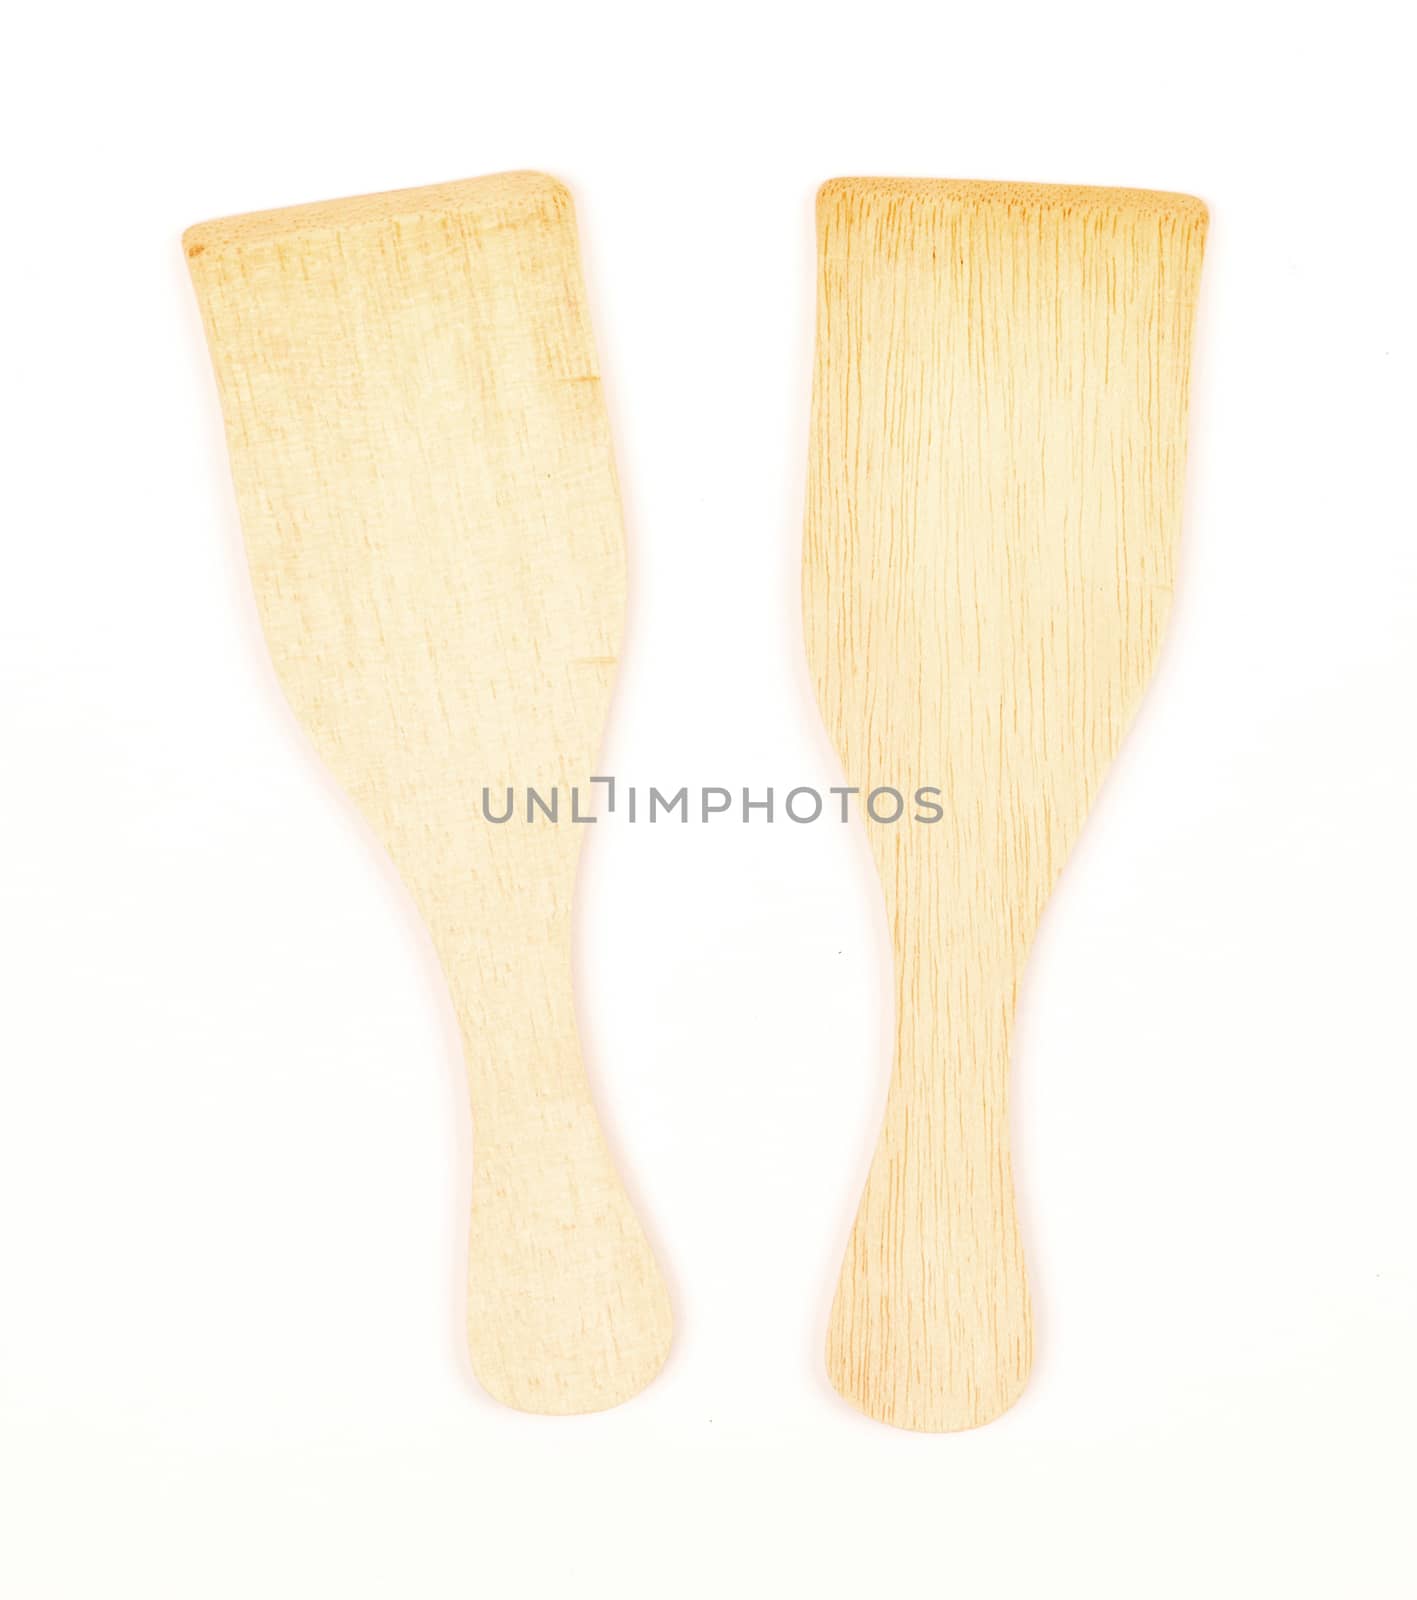 Bamboo spatula set, used for gourmet by michaklootwijk